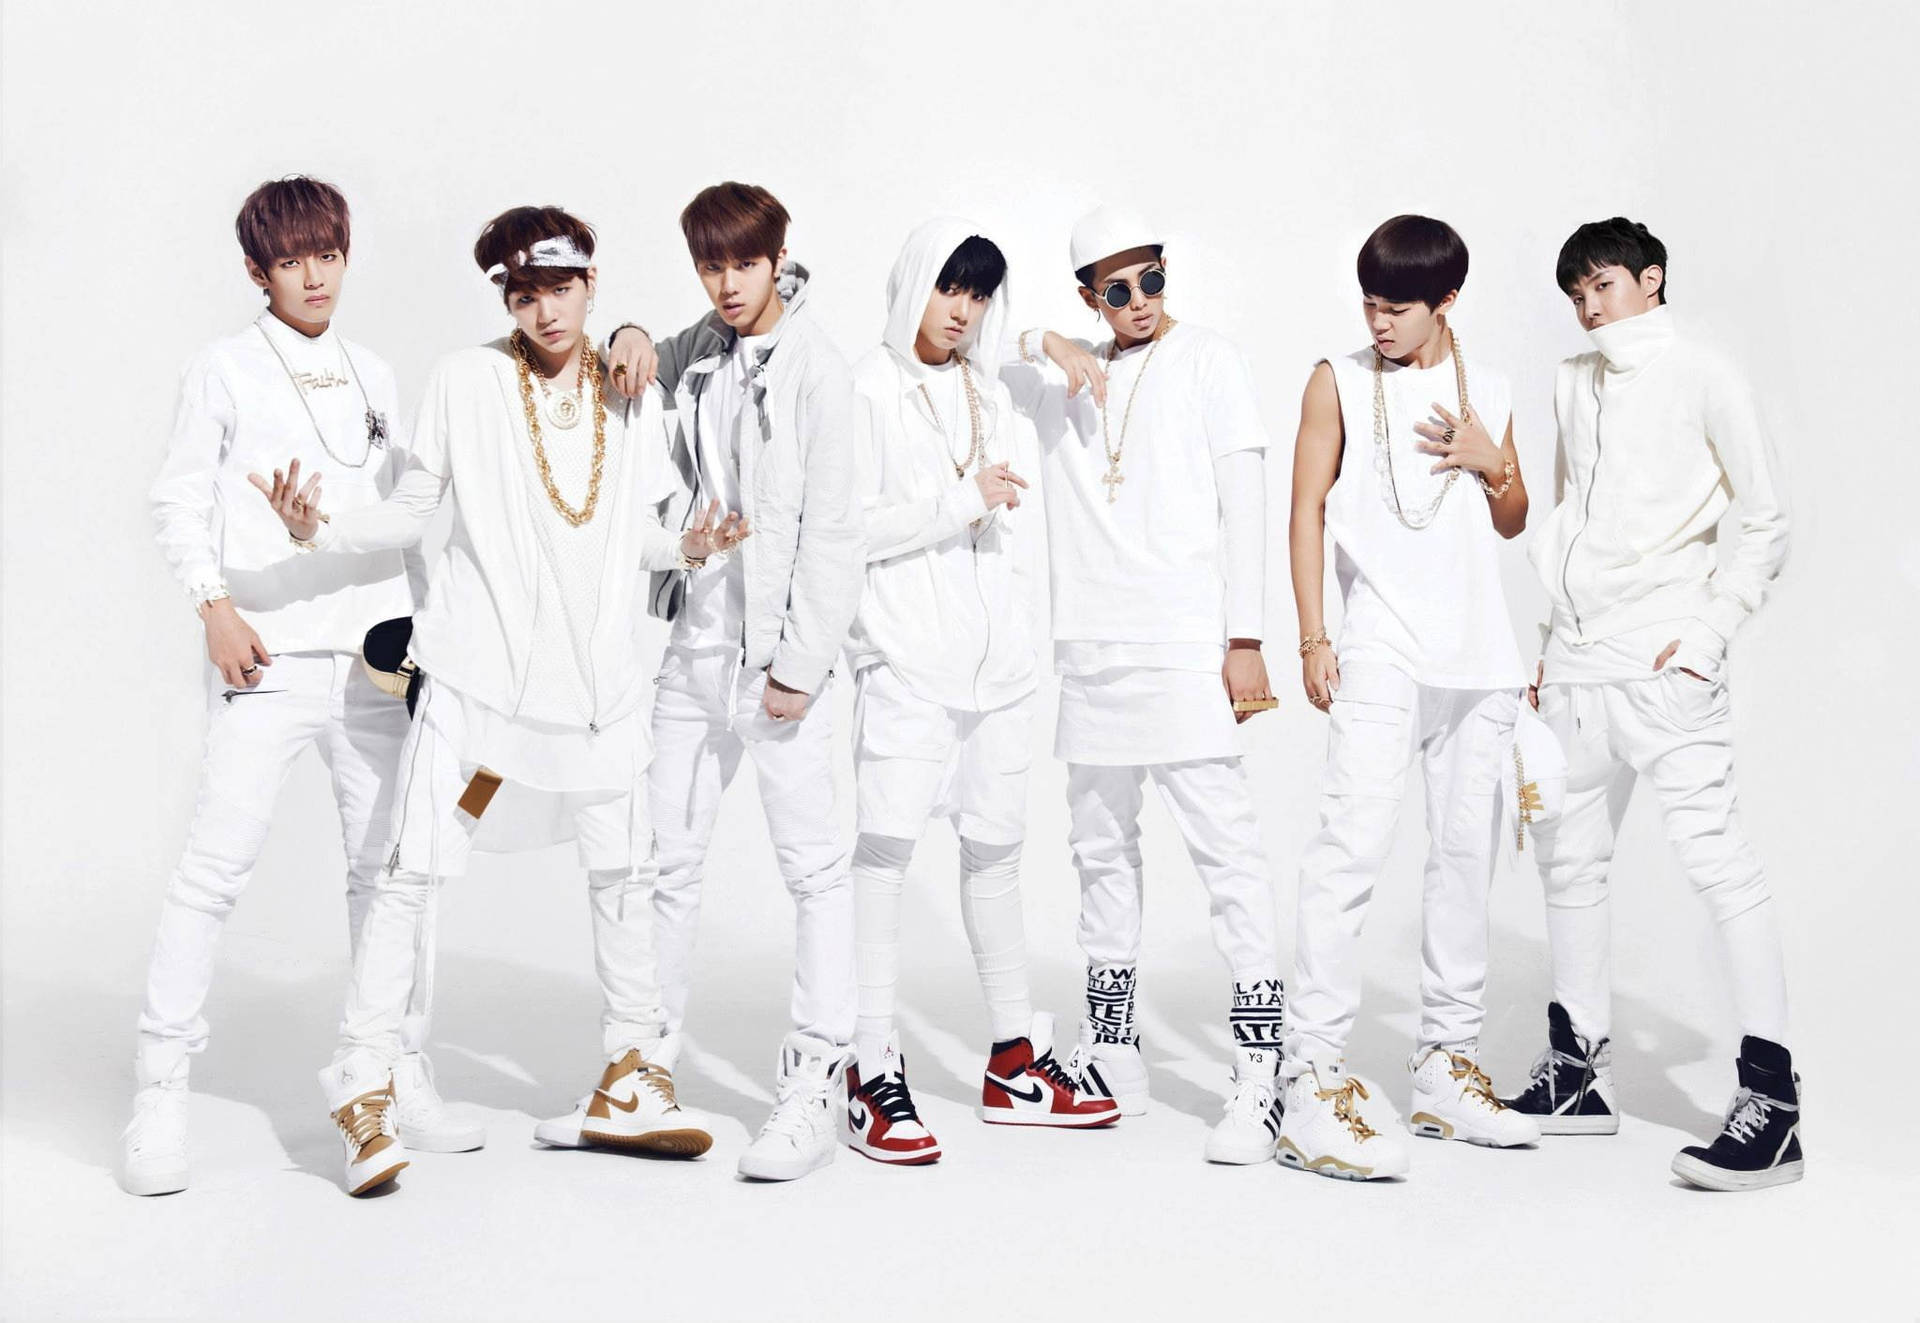 O!rul8,2 Cool Bts Laptop Background